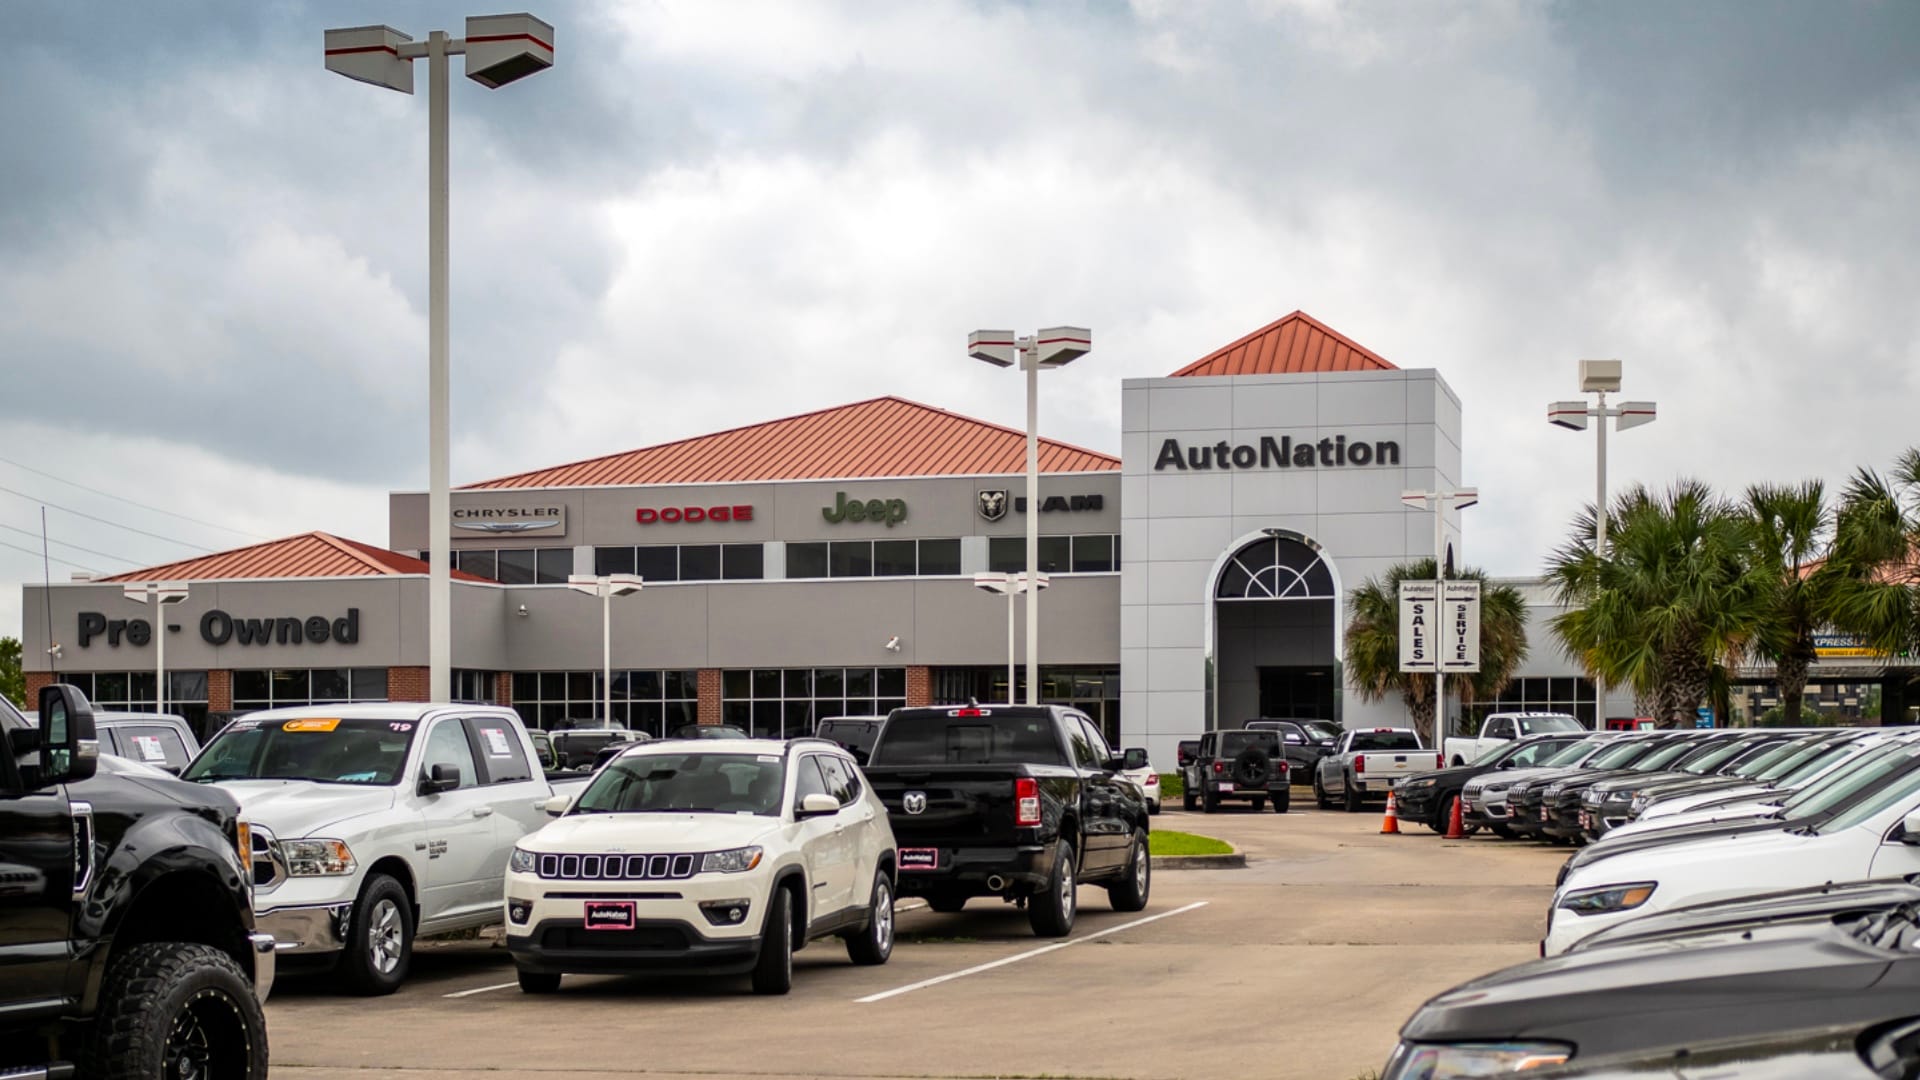 Exterior view of AutoNation Chrysler Dodge Jeep Ram Katy during the day. There is a cloudy sky and many vehicles parked near the grey and brick faced building. Trees and greenery are visible around the parking lot.